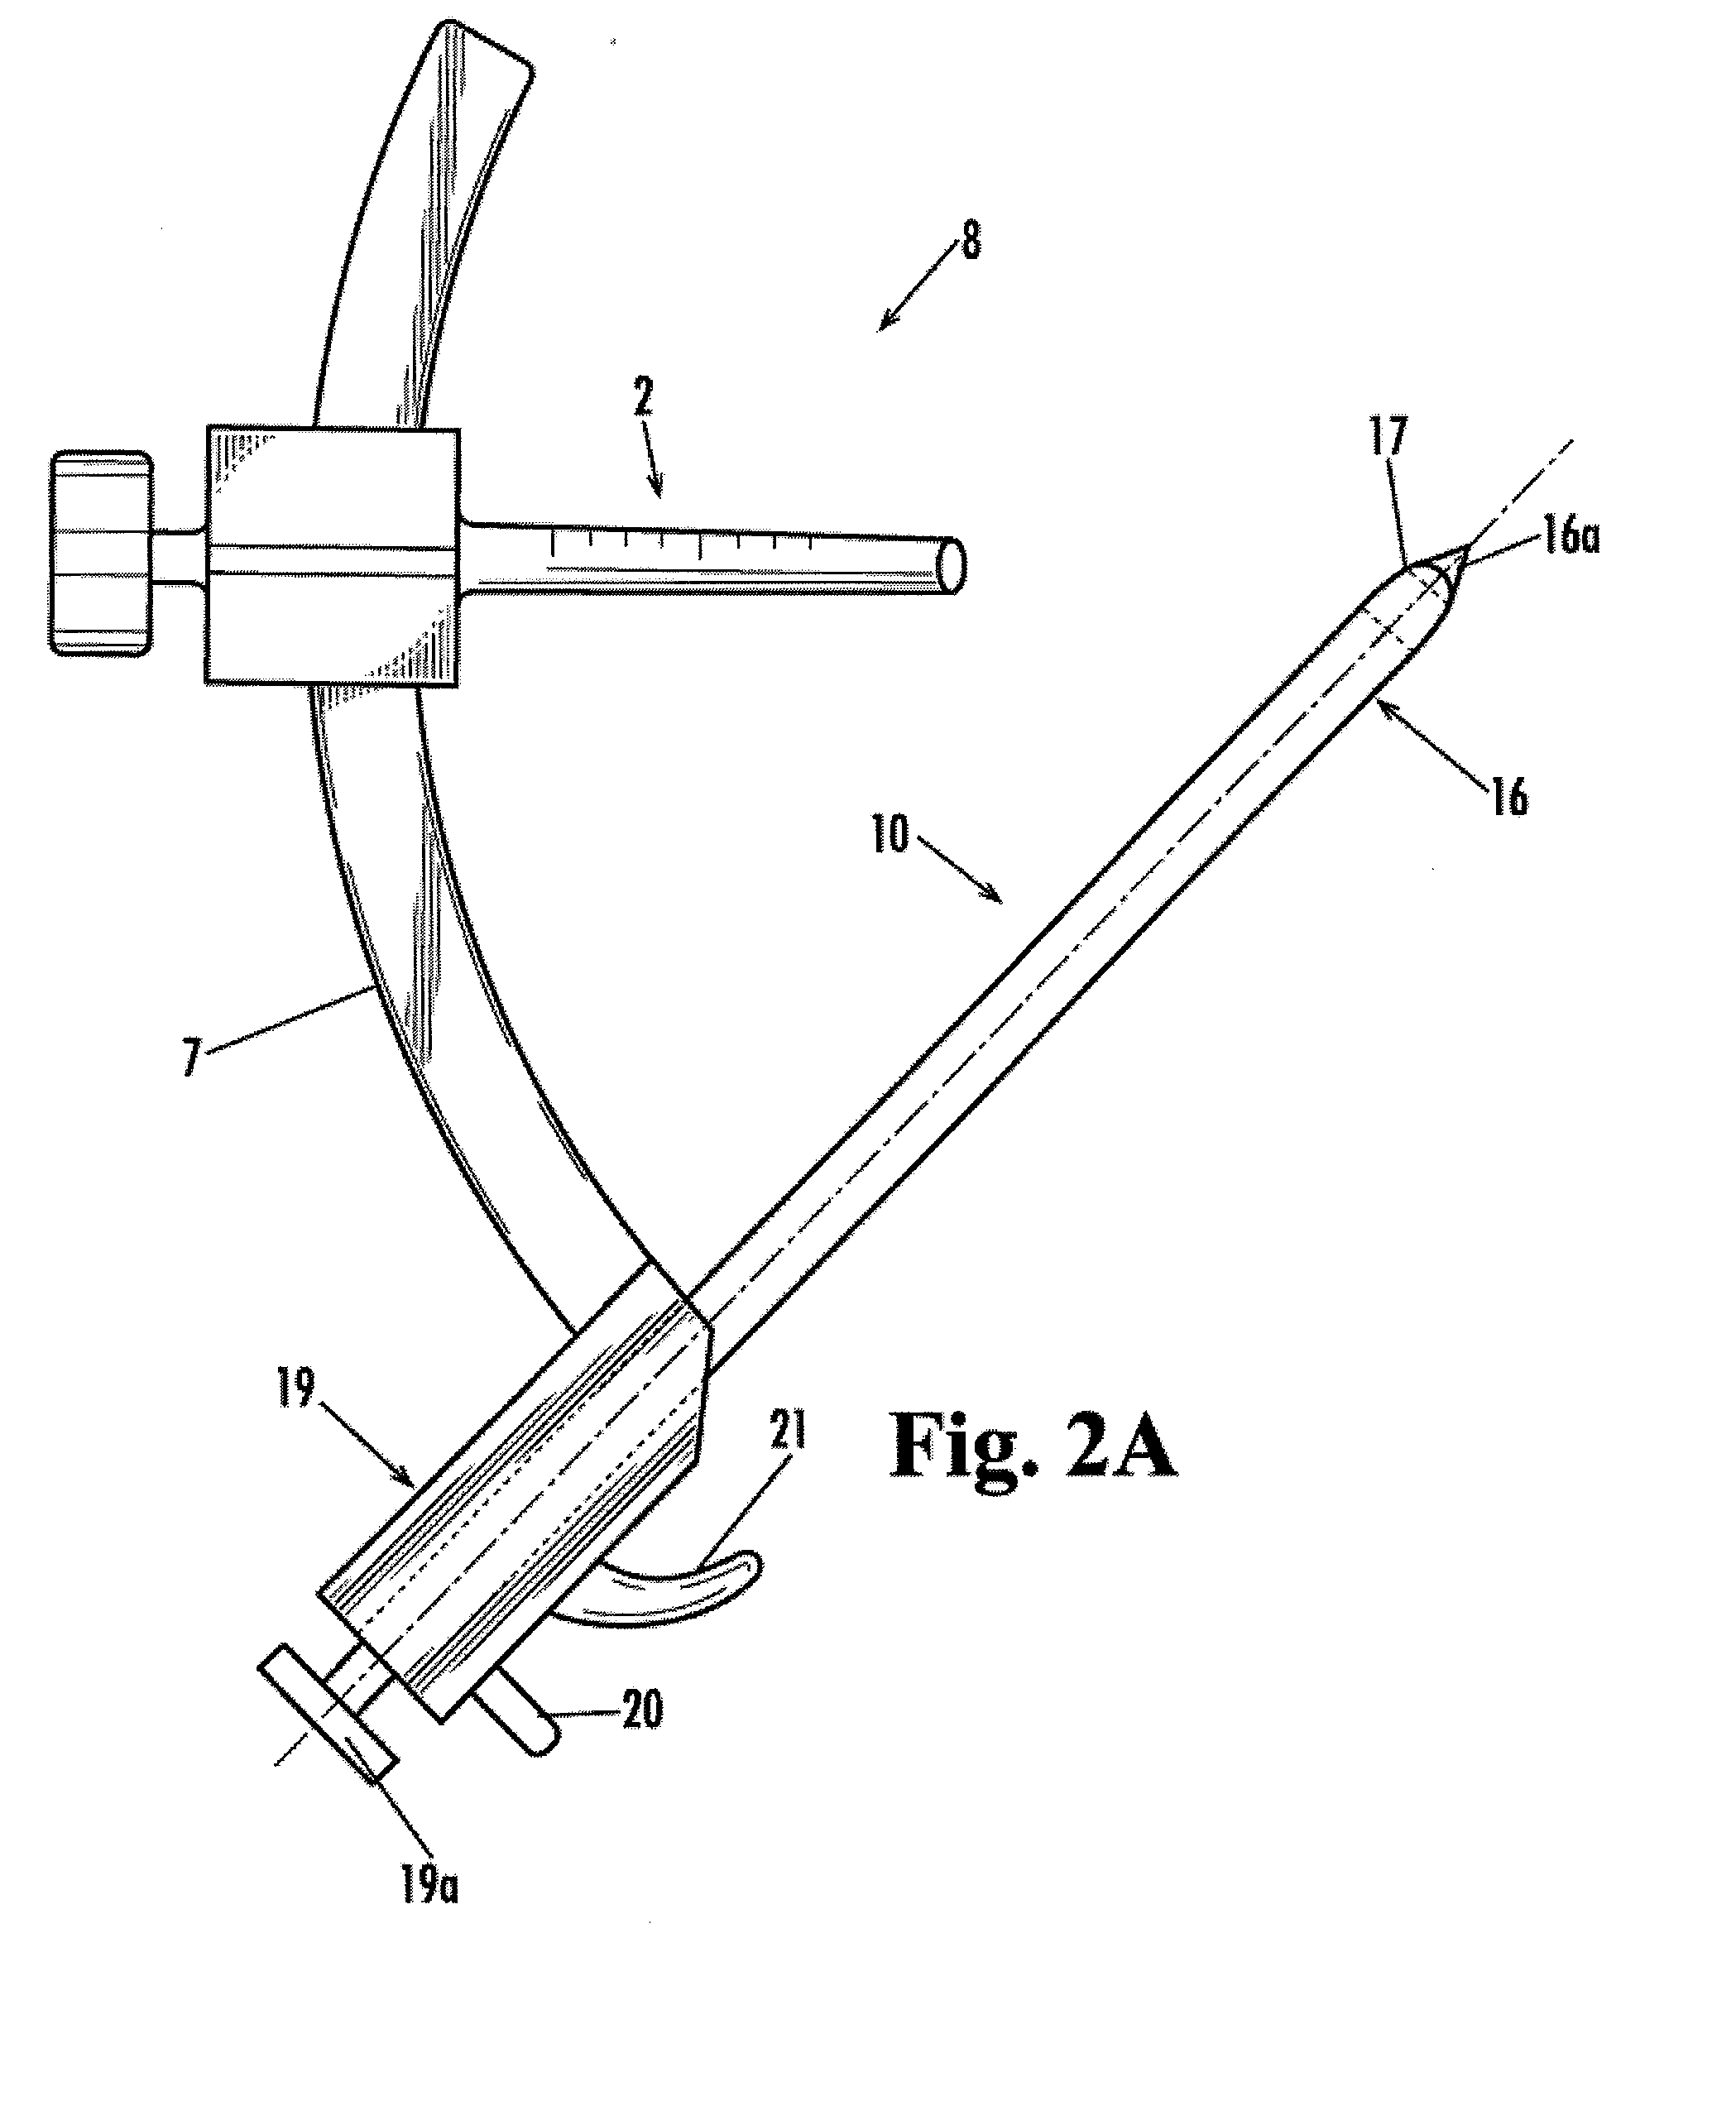 Method for drilling angled osteal tunnels